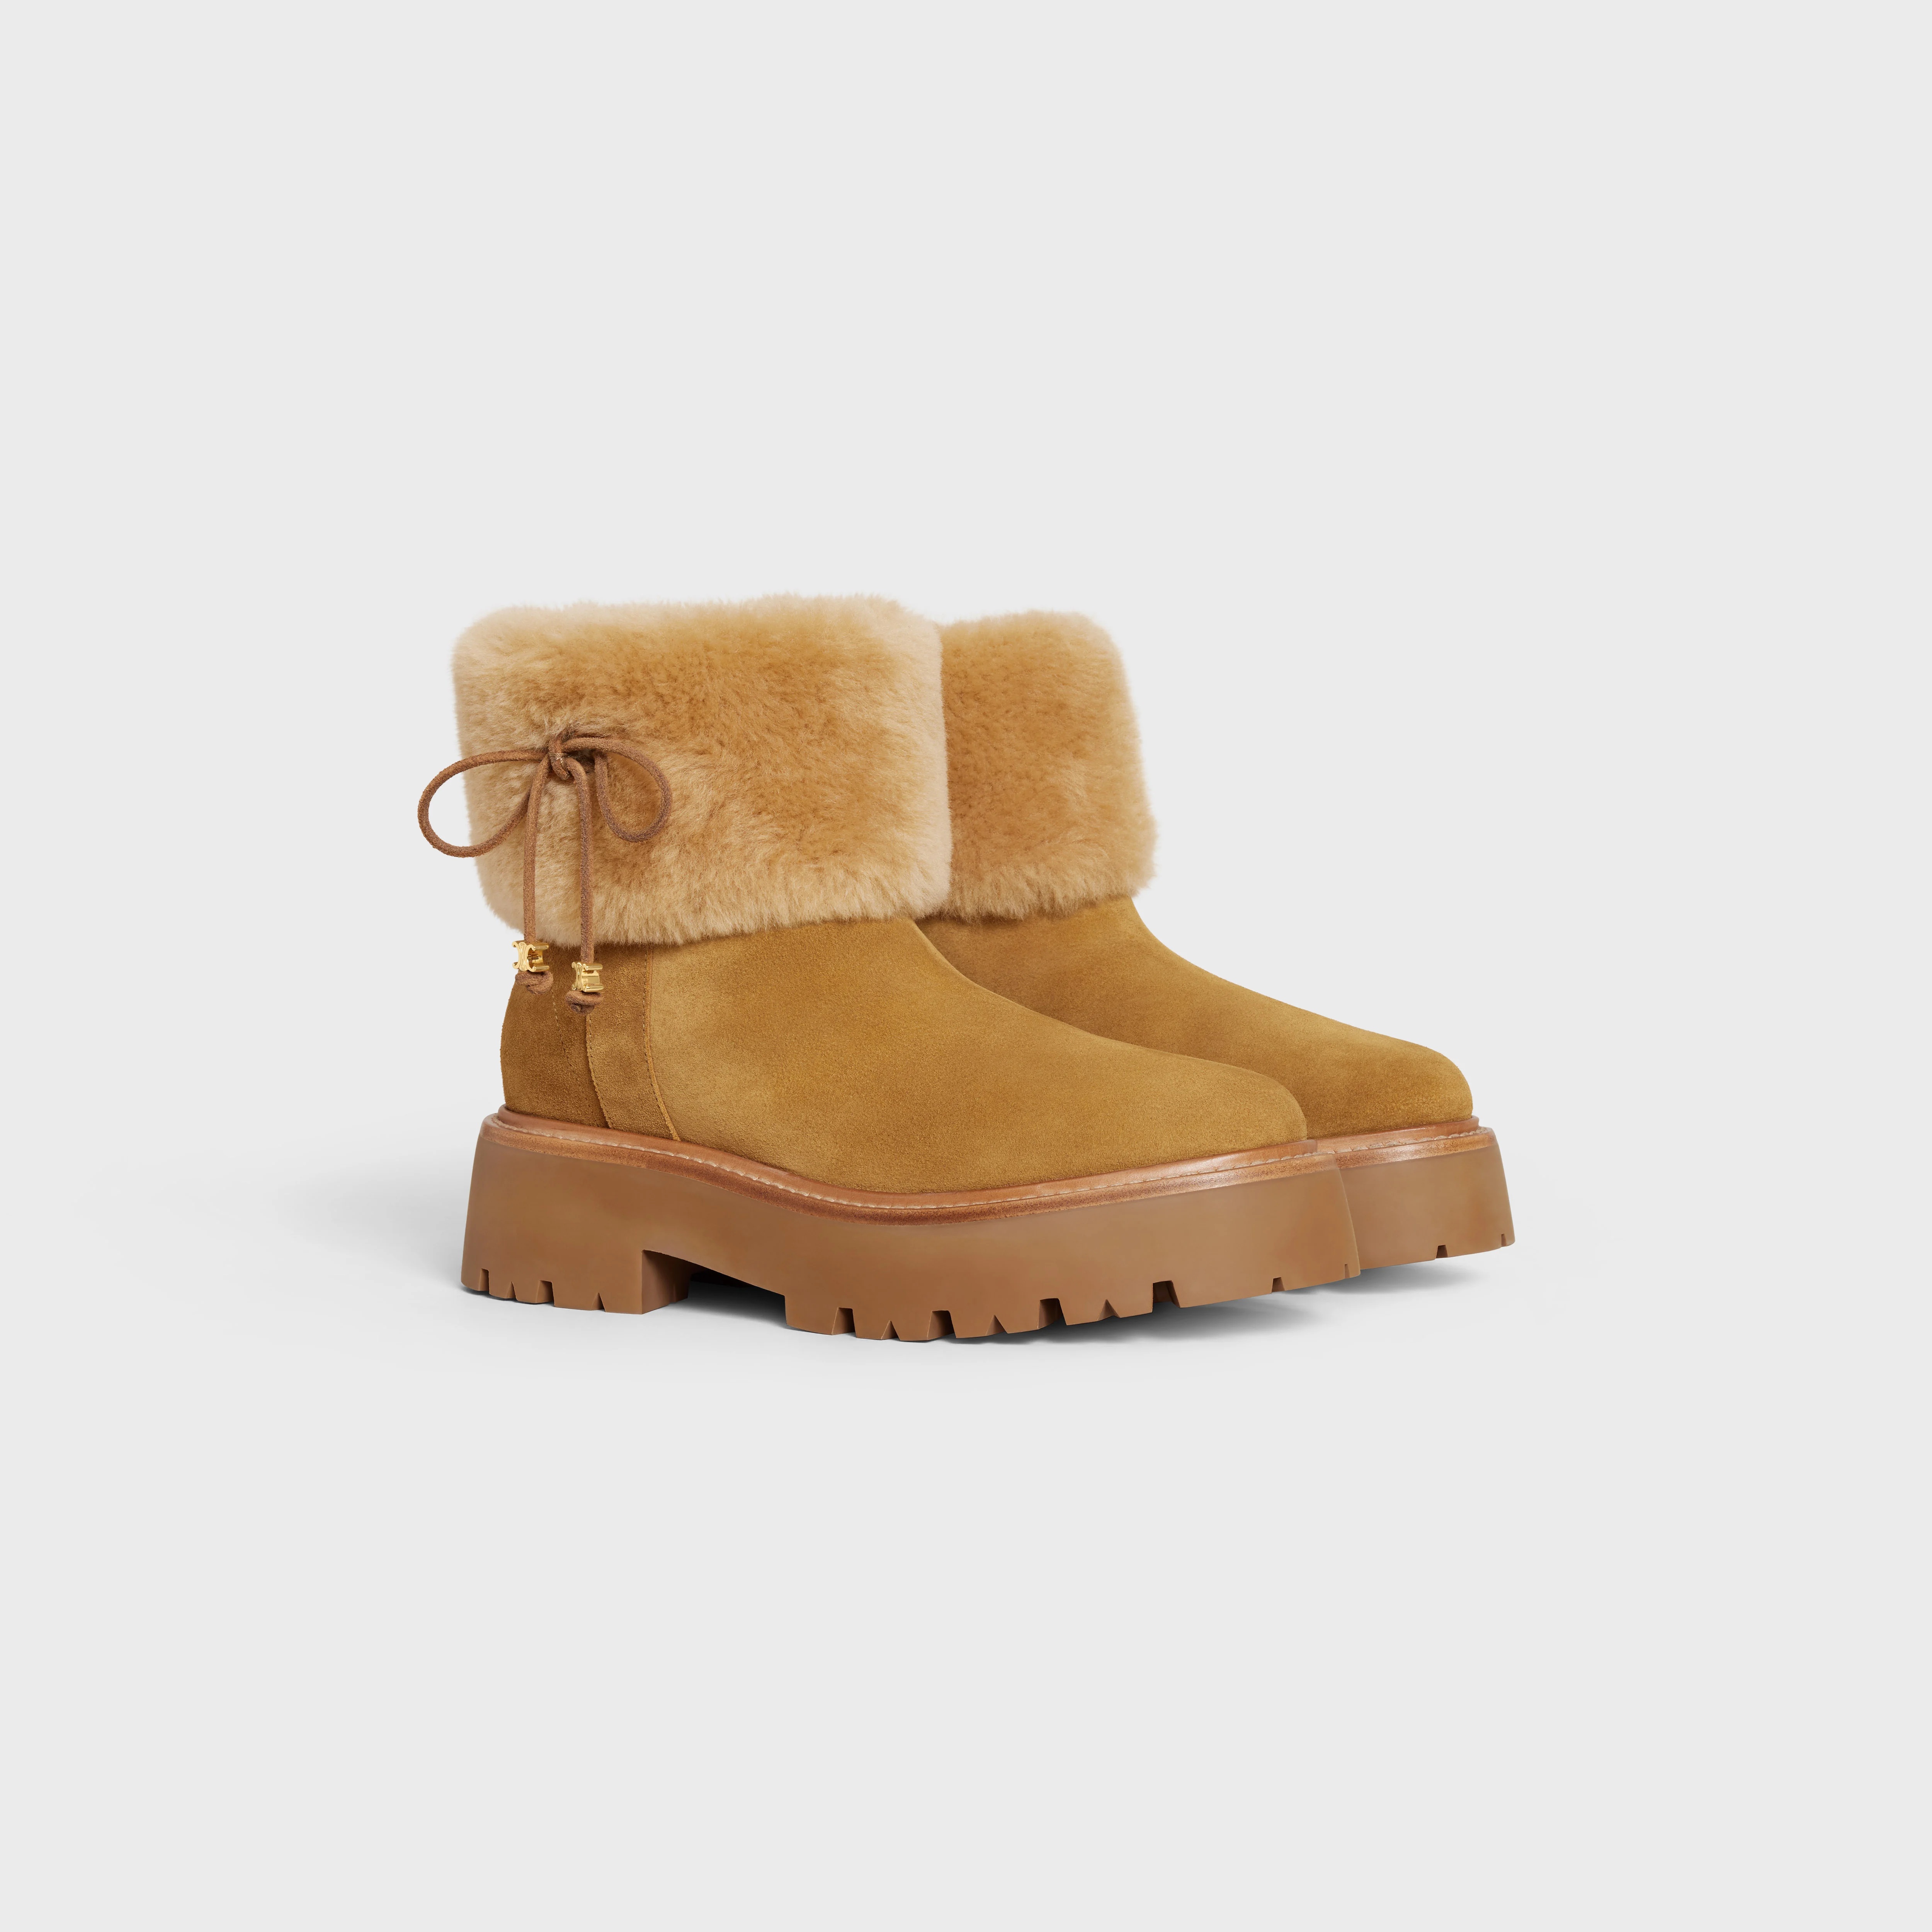 CELINE BULKY CROPPED BOOT WITH TRIOMPHE TASSELS in SUEDE CALFSKIN AND SHEARLING - 2